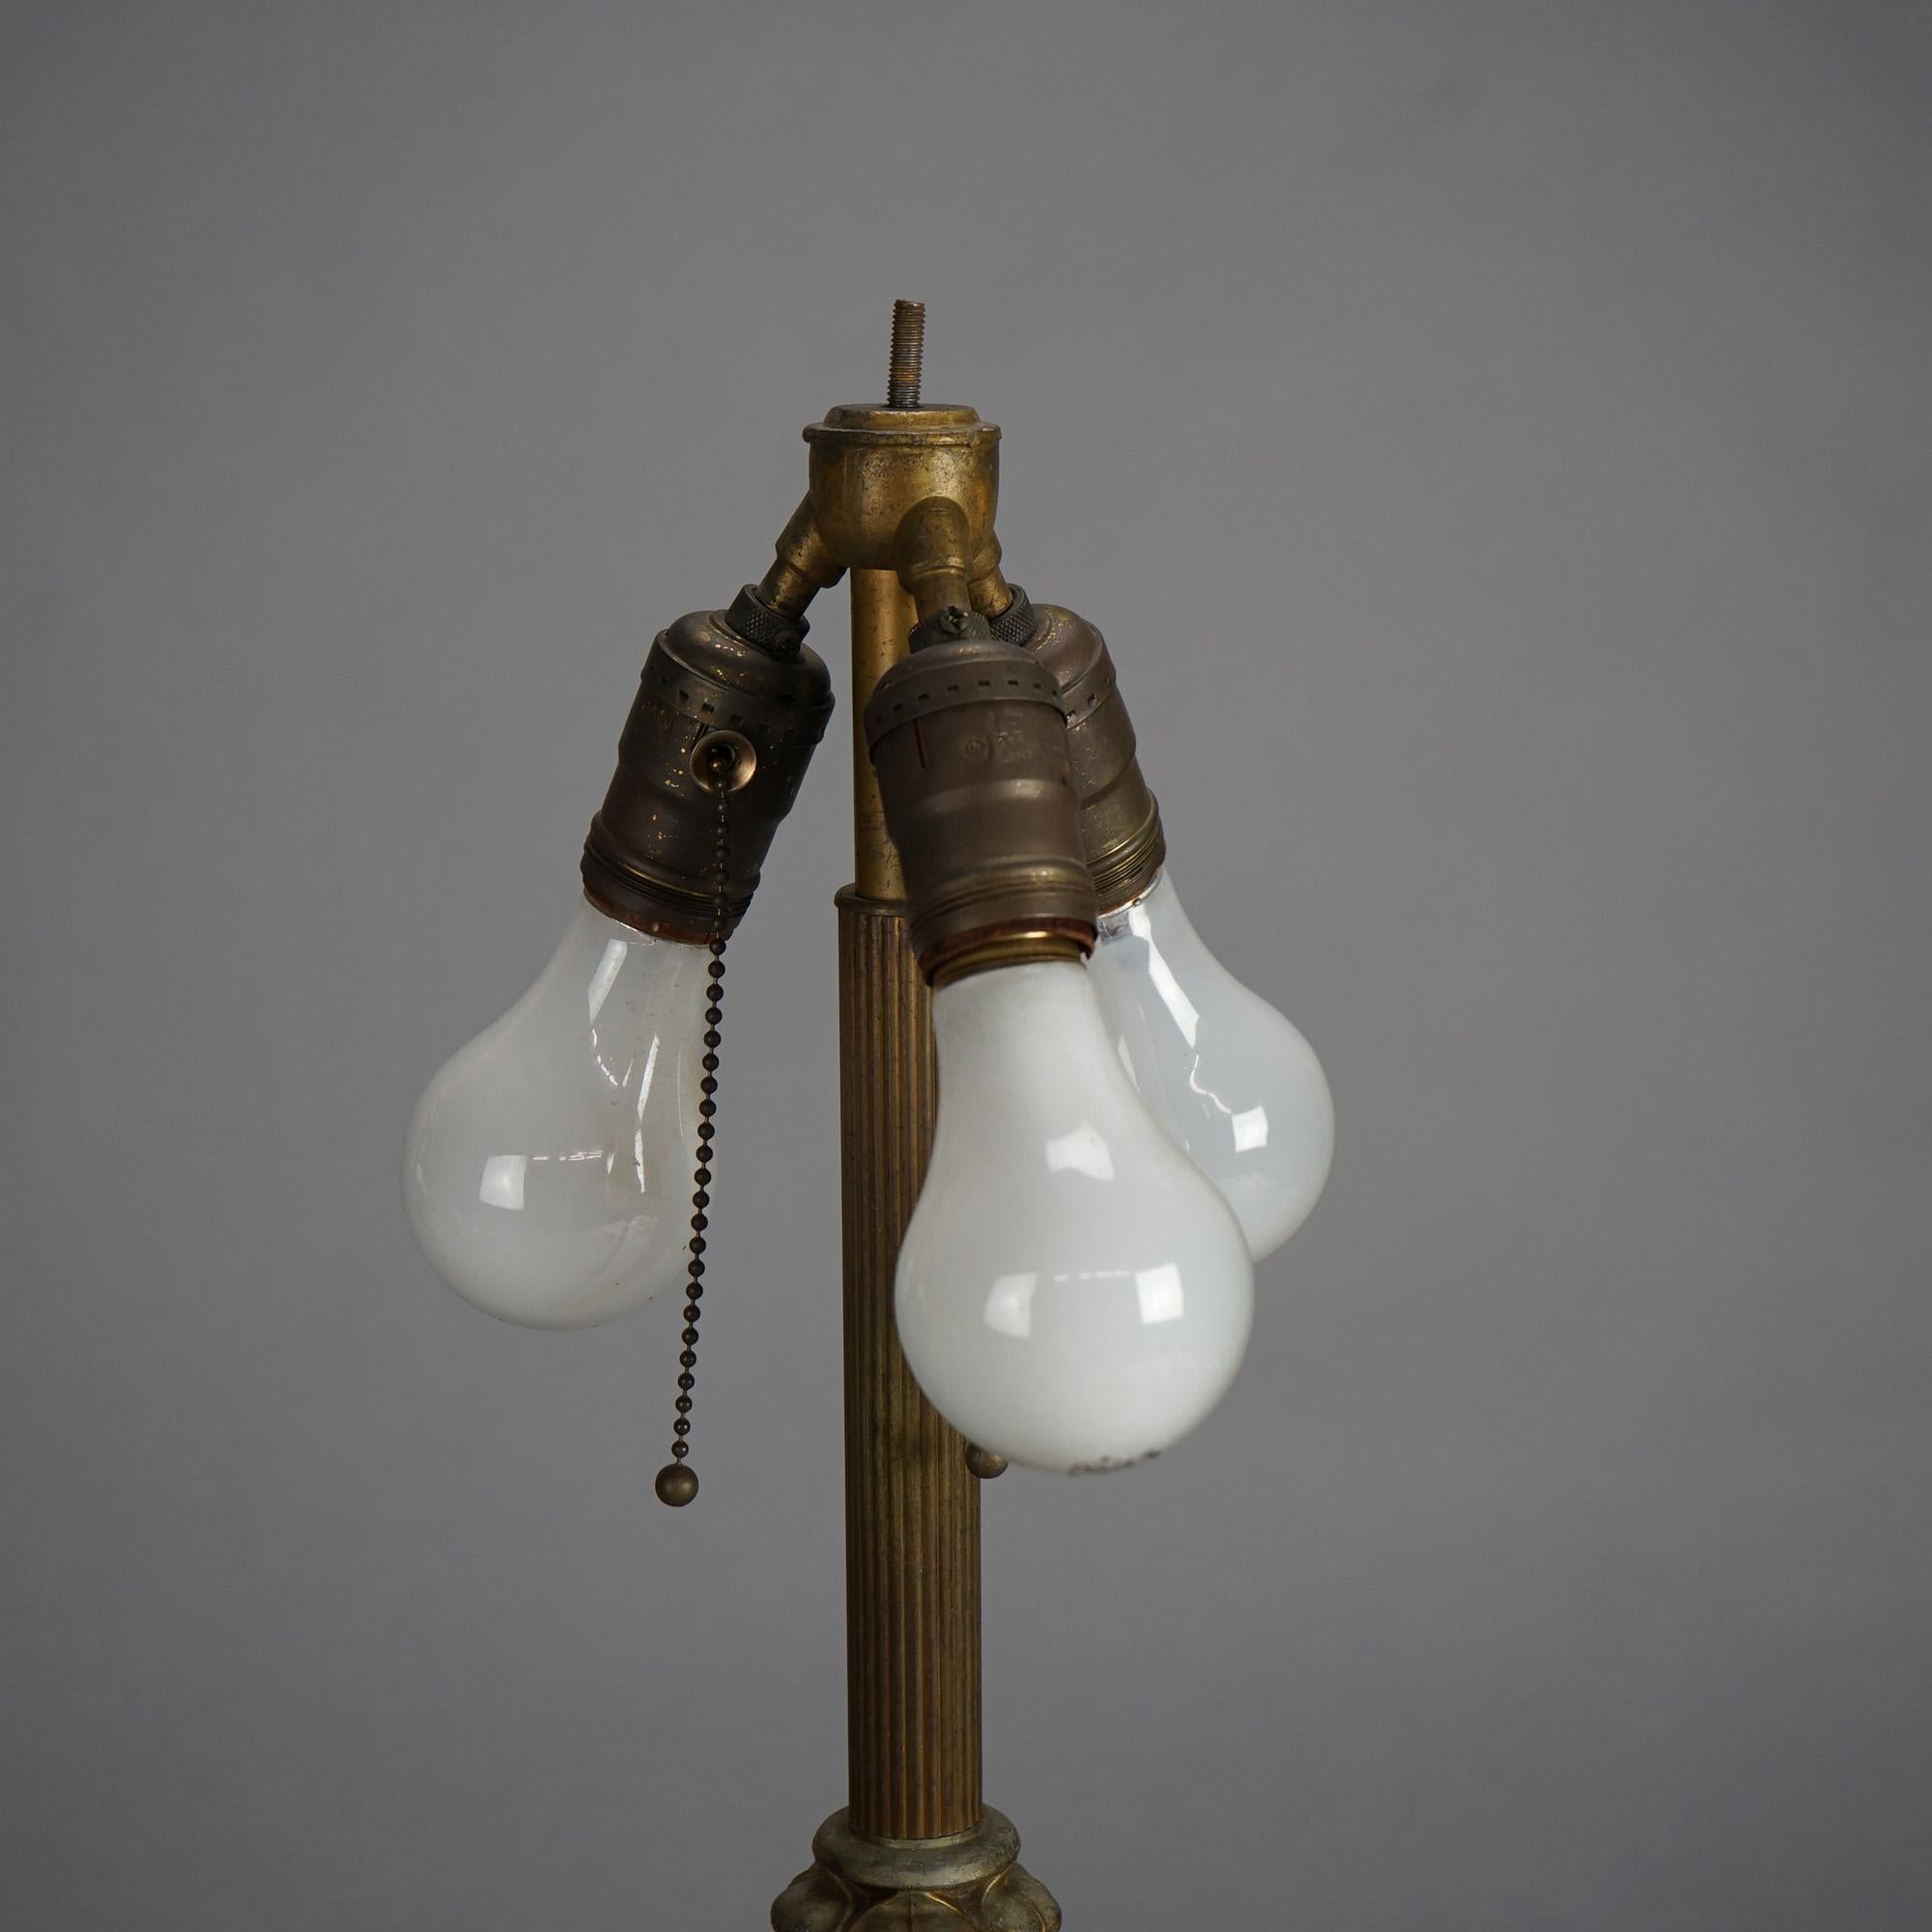 Antique Arts & Crafts Neoclassical Bradley & Hubbard Slag Glass Table Lamp C1920 For Sale 9